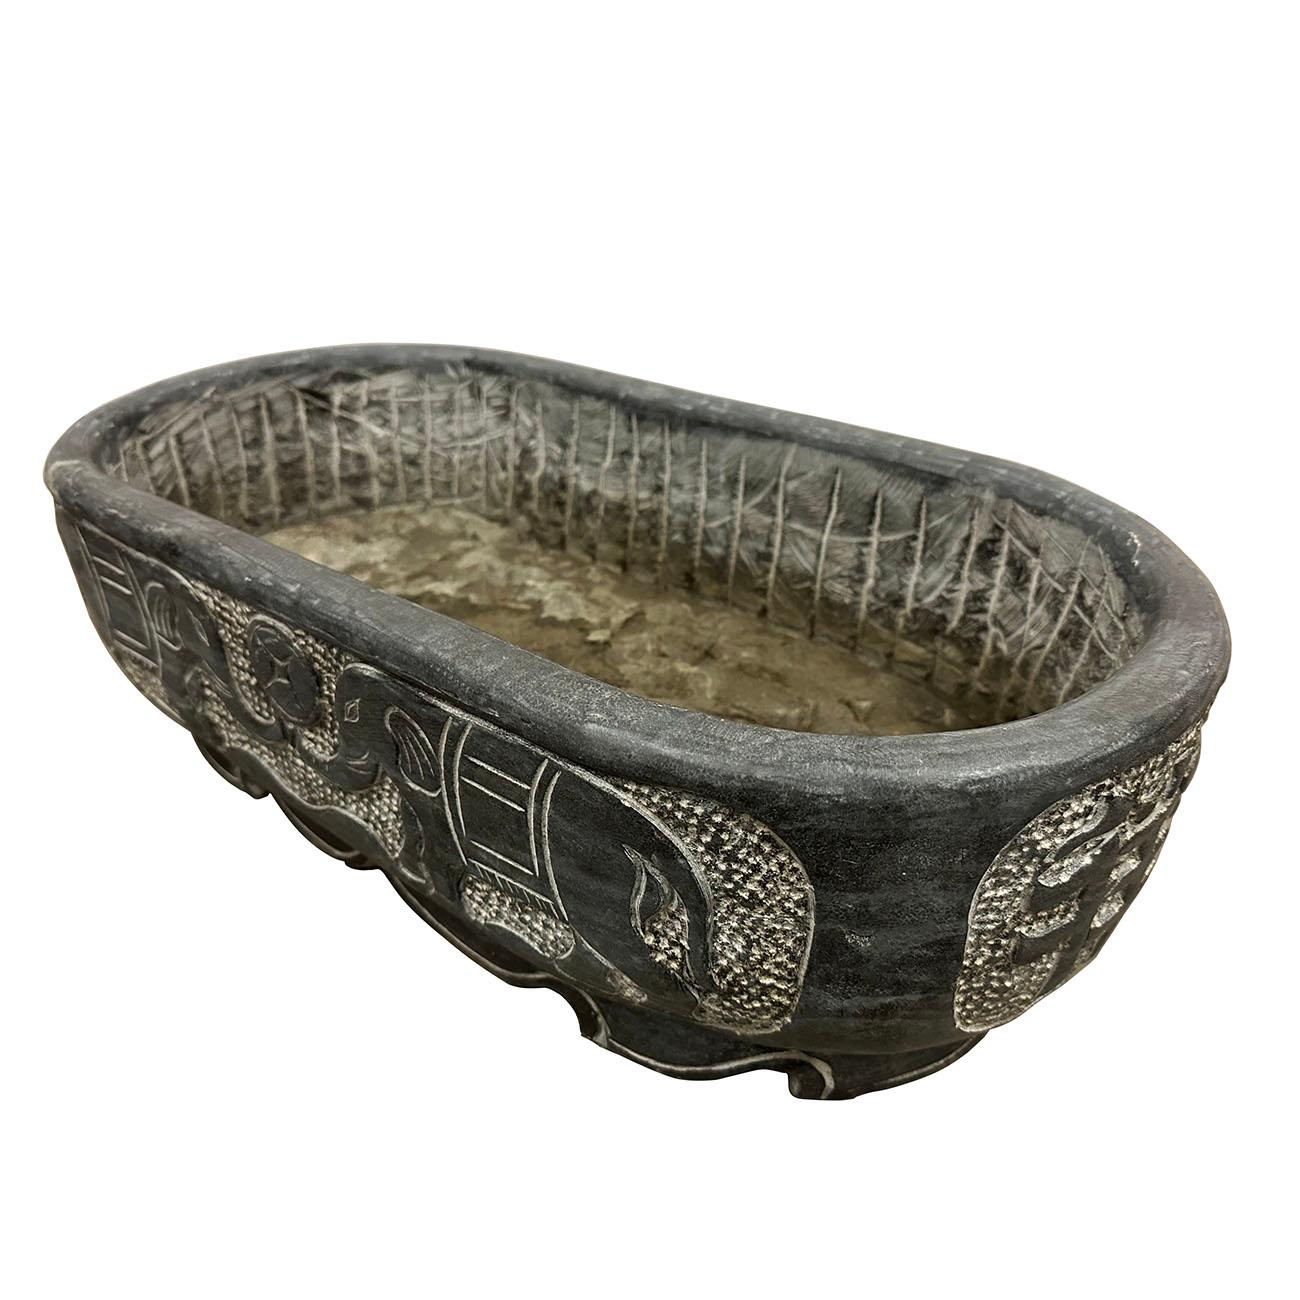 This stone planter is retrieved from the village in northern part of China. It is hand chiseled out of one piece of stone and hand carved by the local stone master. It's originally for feeding chicken, ducks, etc. Now It can be an unique garden